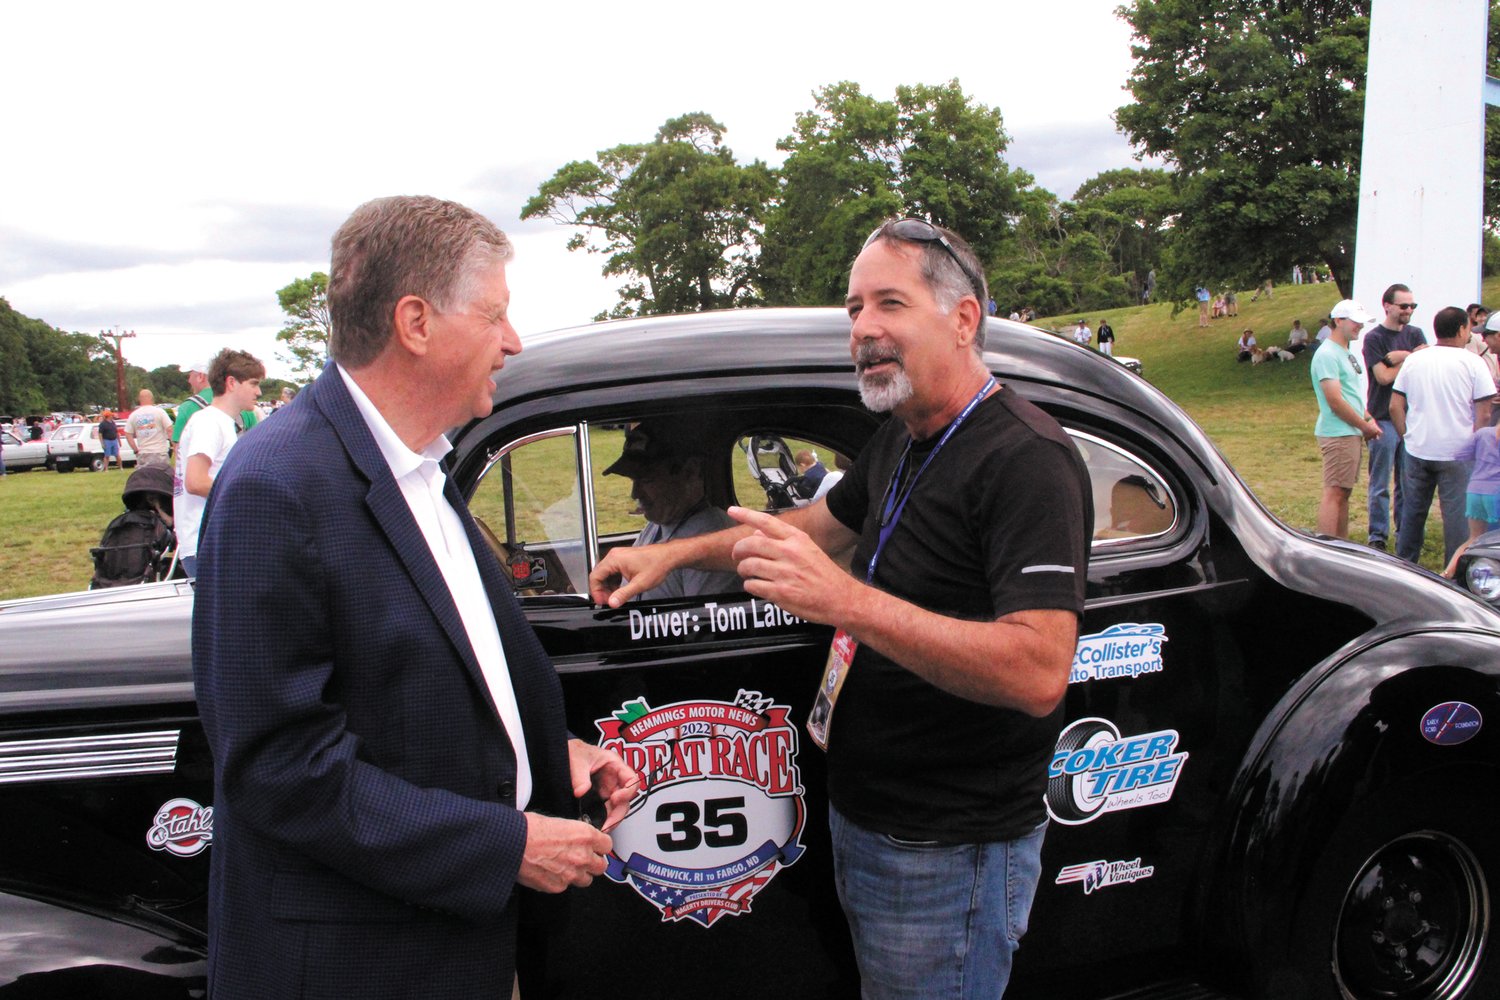 HOW IT’S DONE: Tom Laferriere of Smithfield, the only Rhode Island entrant talks about the race with Gov. Dan McKee before setting off for Fargo, ND.